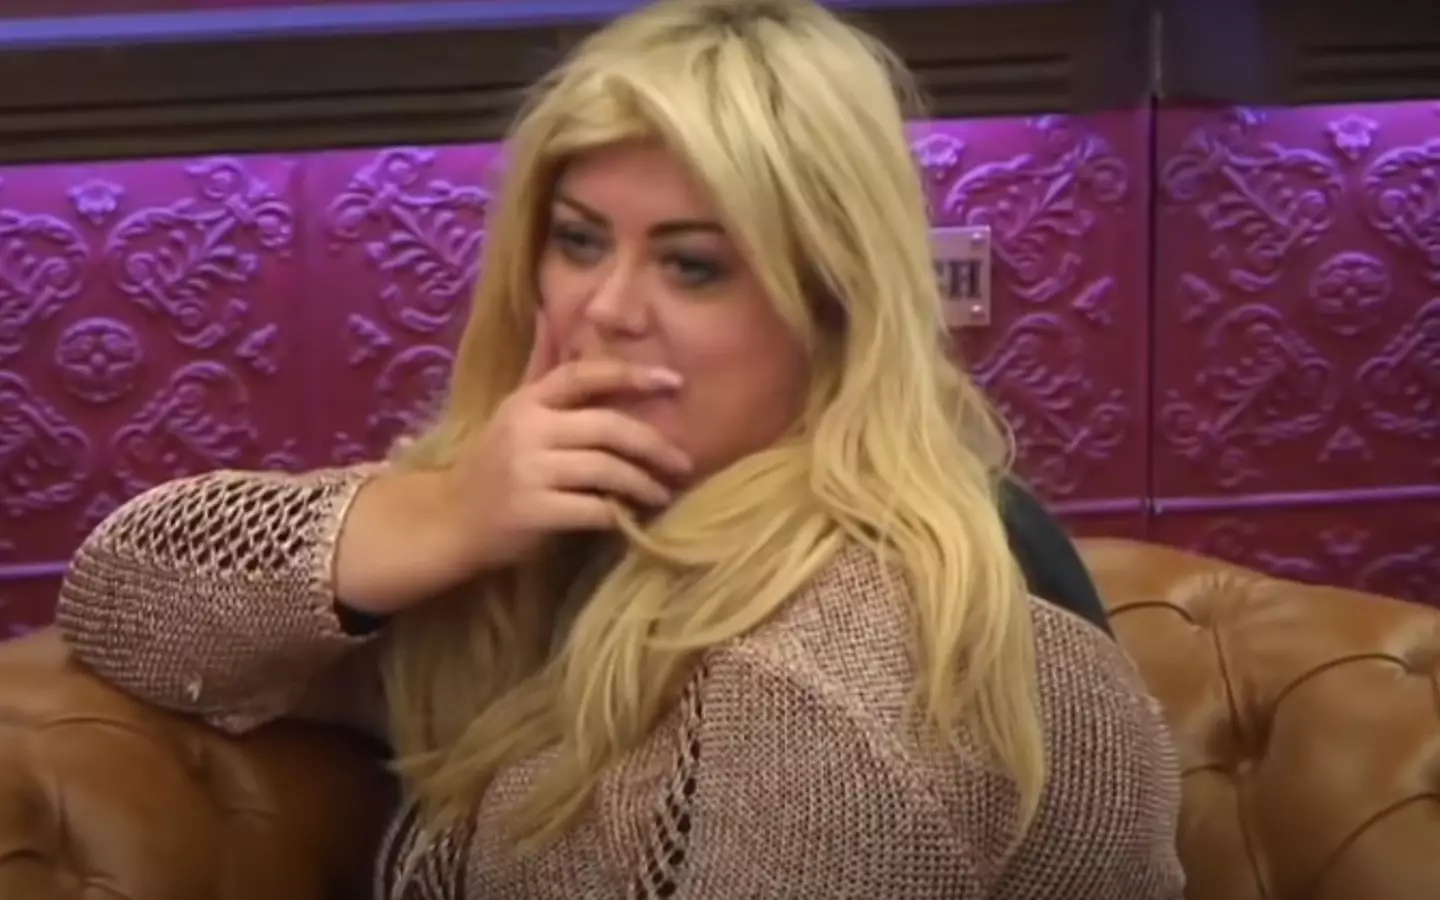 Gemma Collins made her mark on the show in 2016.